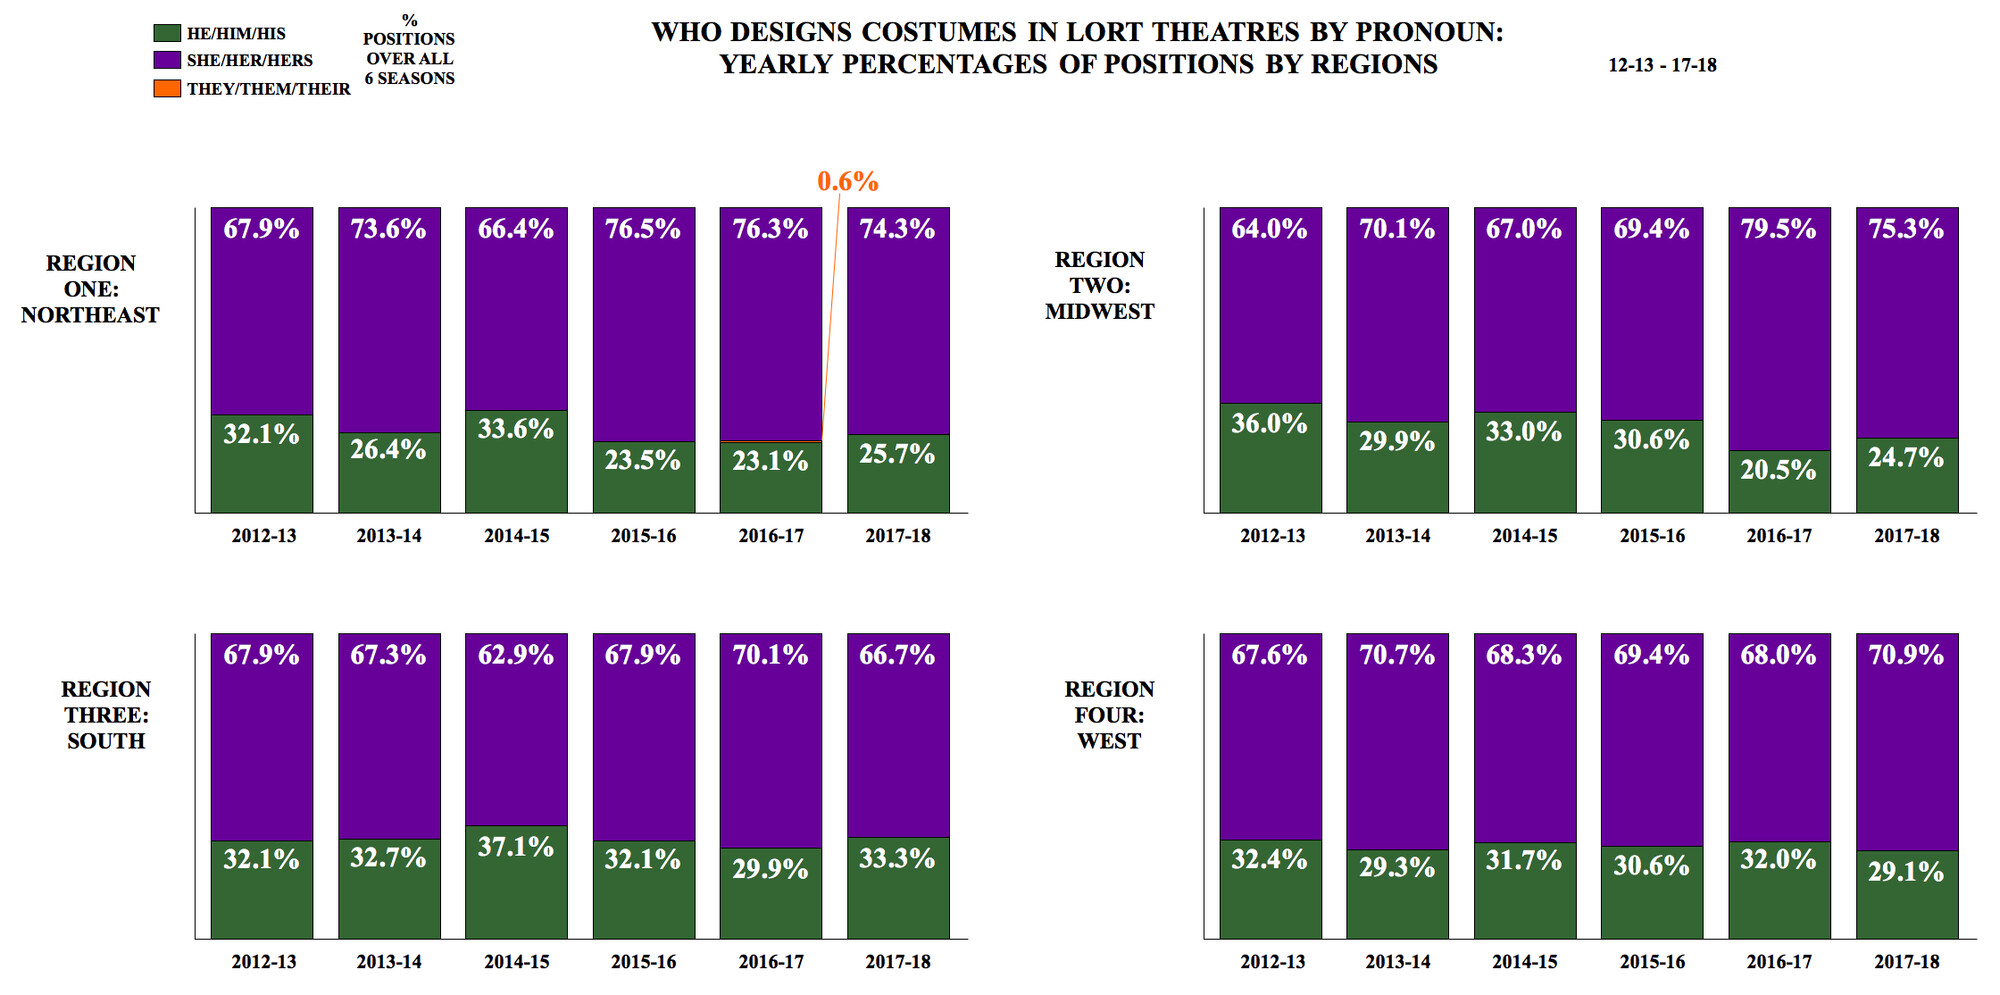 Who Designs Costumes in LORT Theatres by Pronoun: Yearly Percentages of Positions by Regions